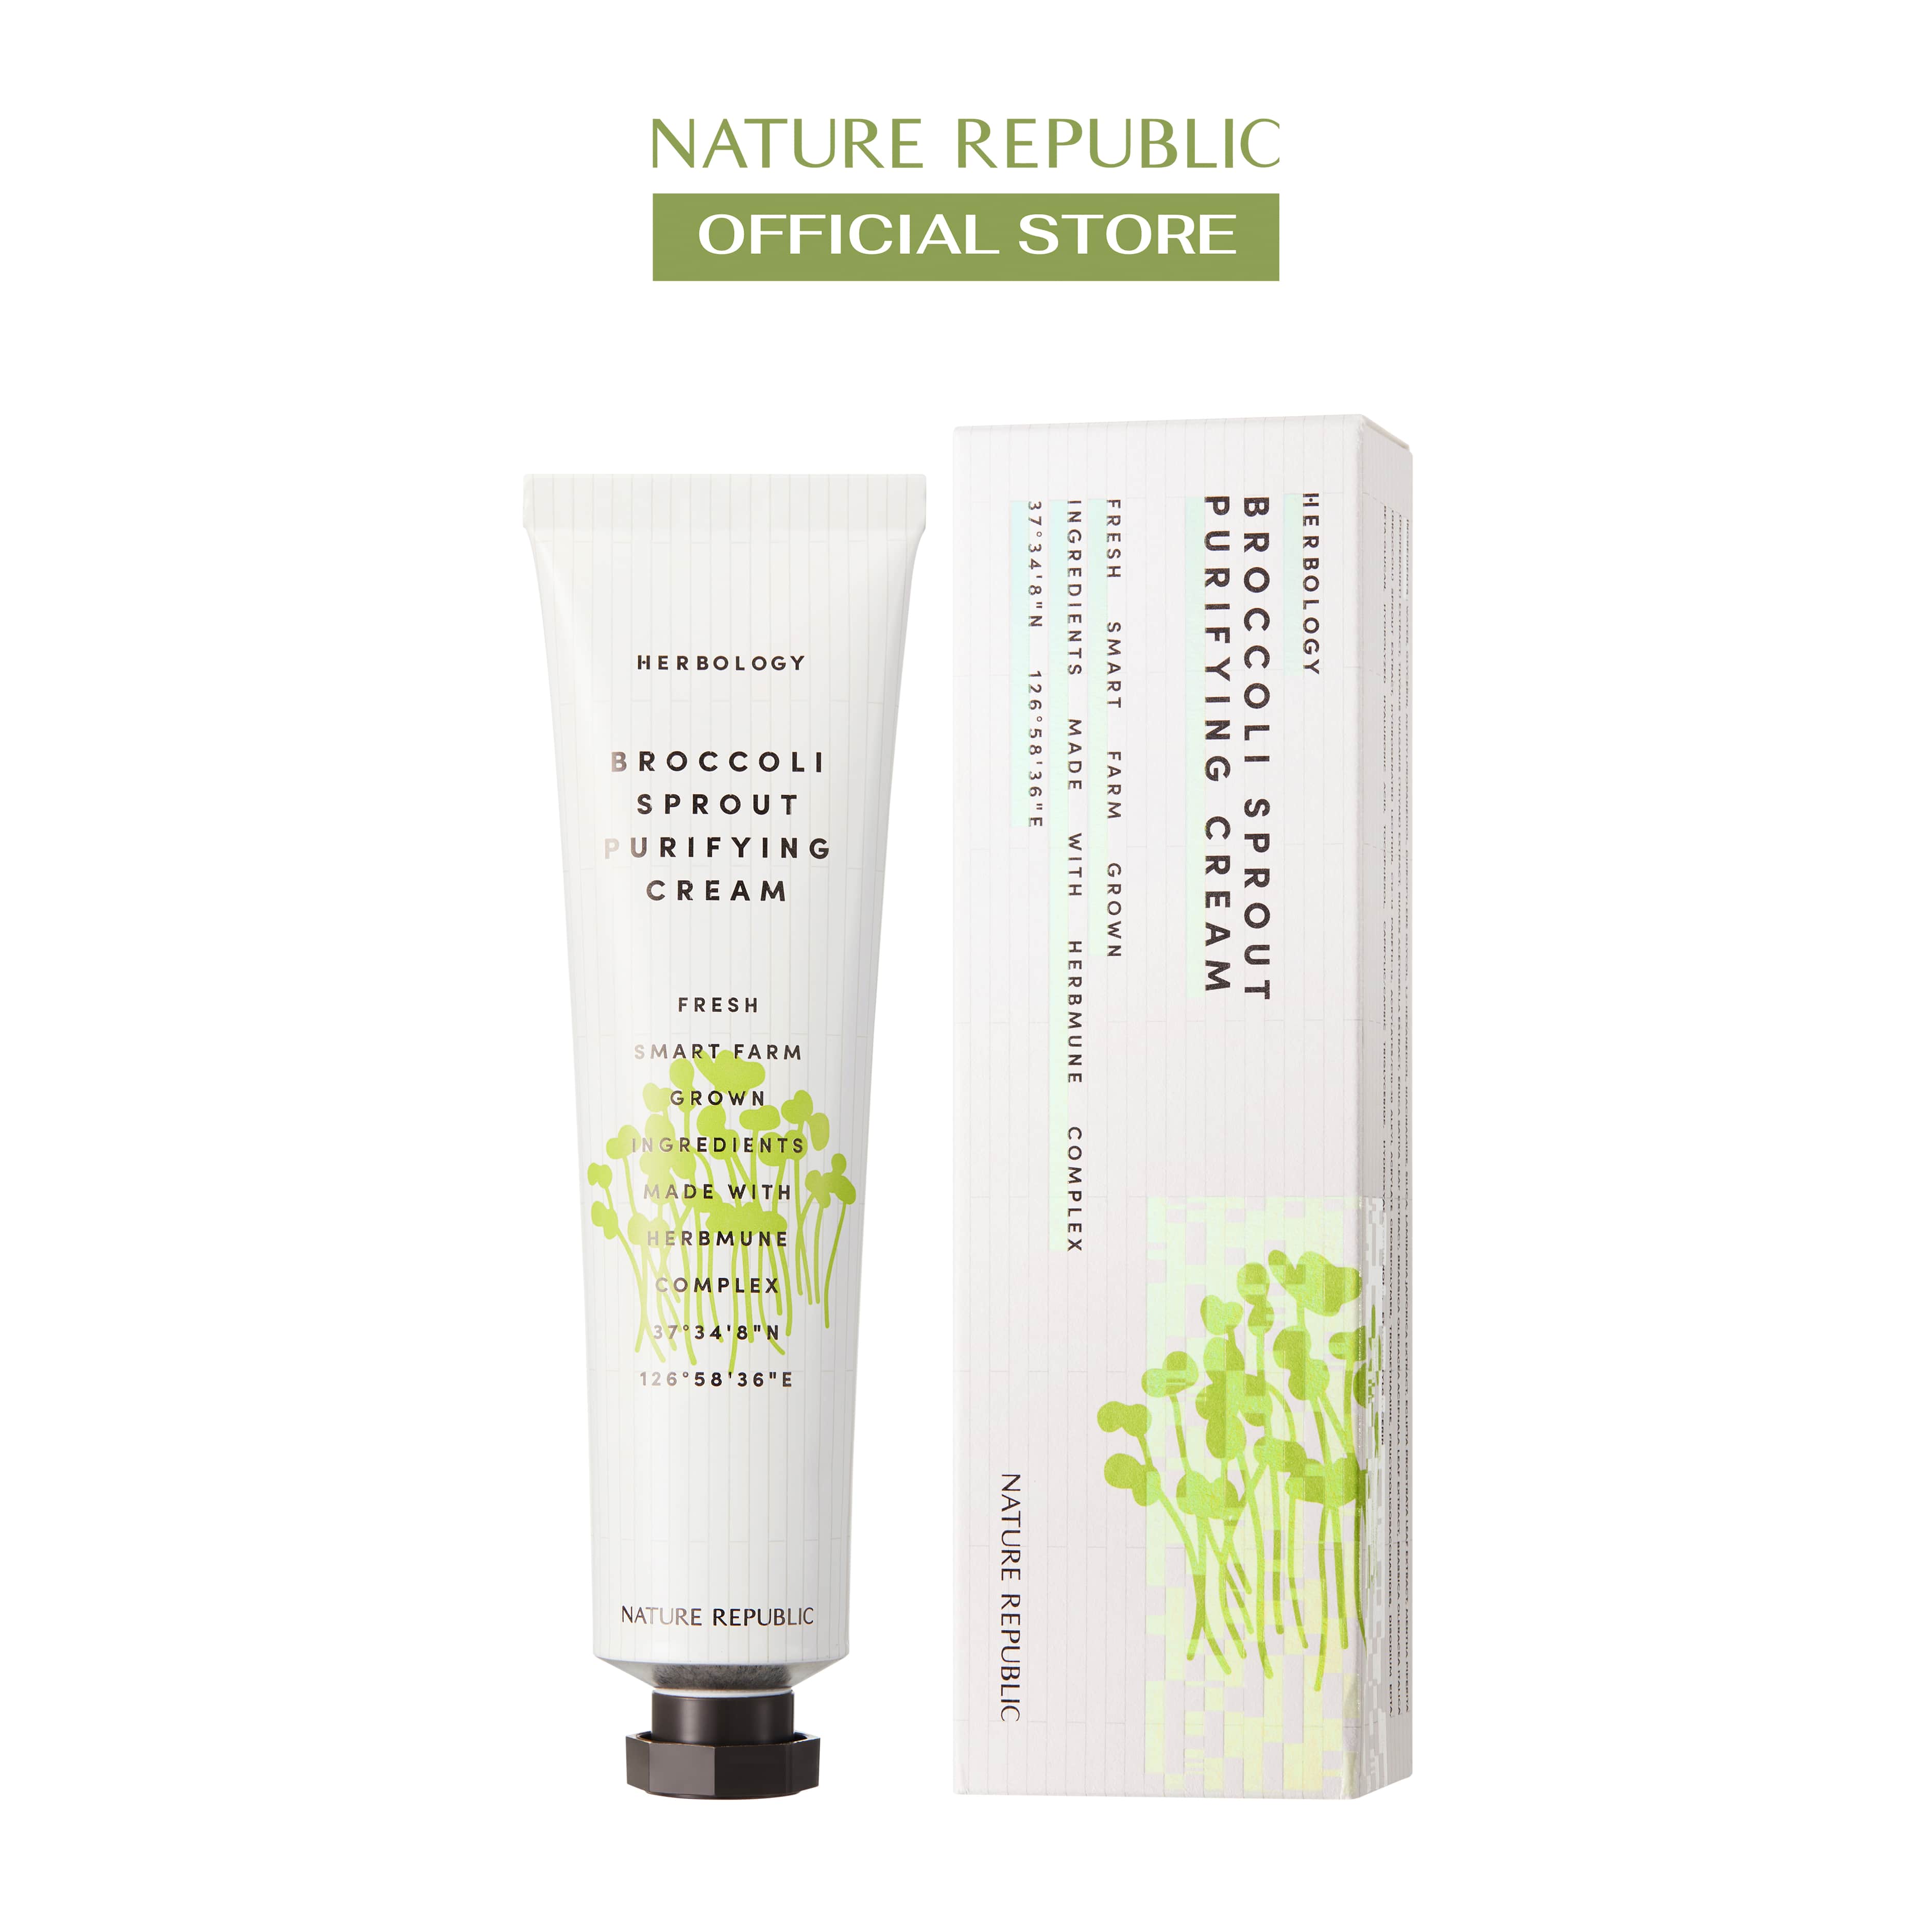 Kem dưỡng Nature Republic Herbology Broccoli Sprout Purifying Cream 70ml